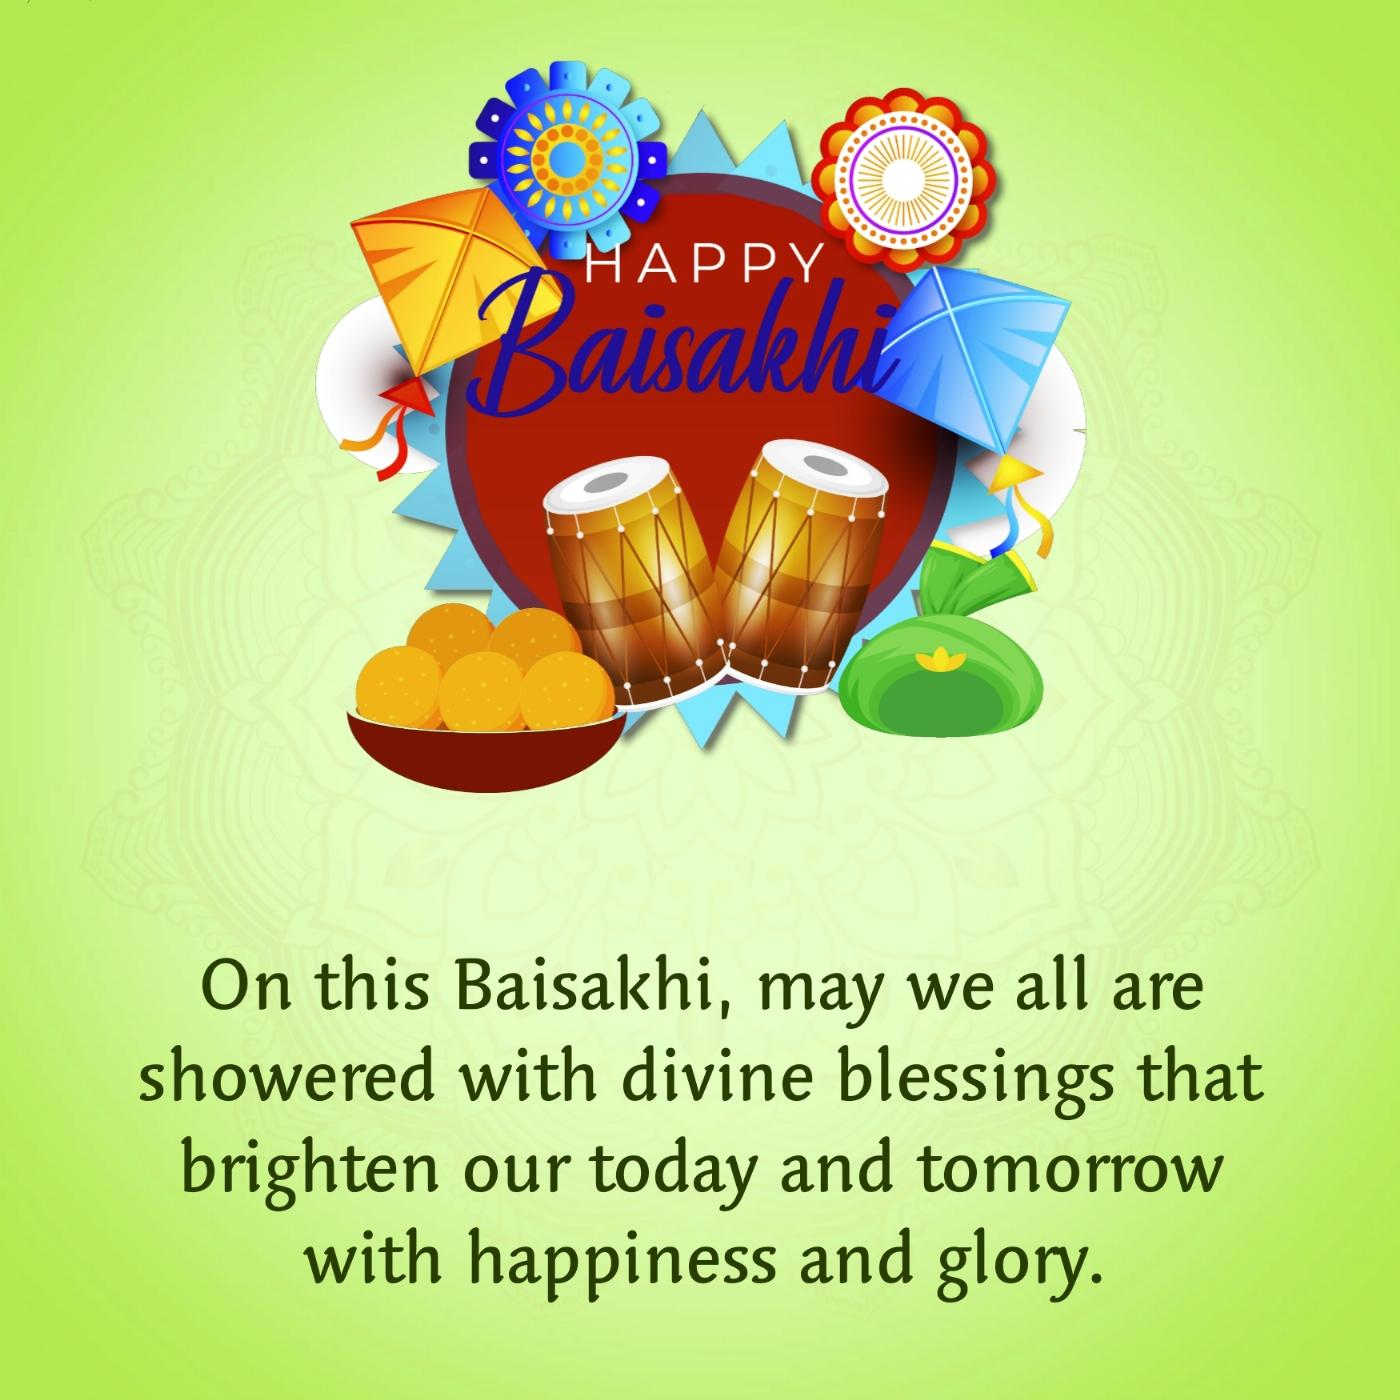 On this Baisakhi may we all are showered with divine blessings